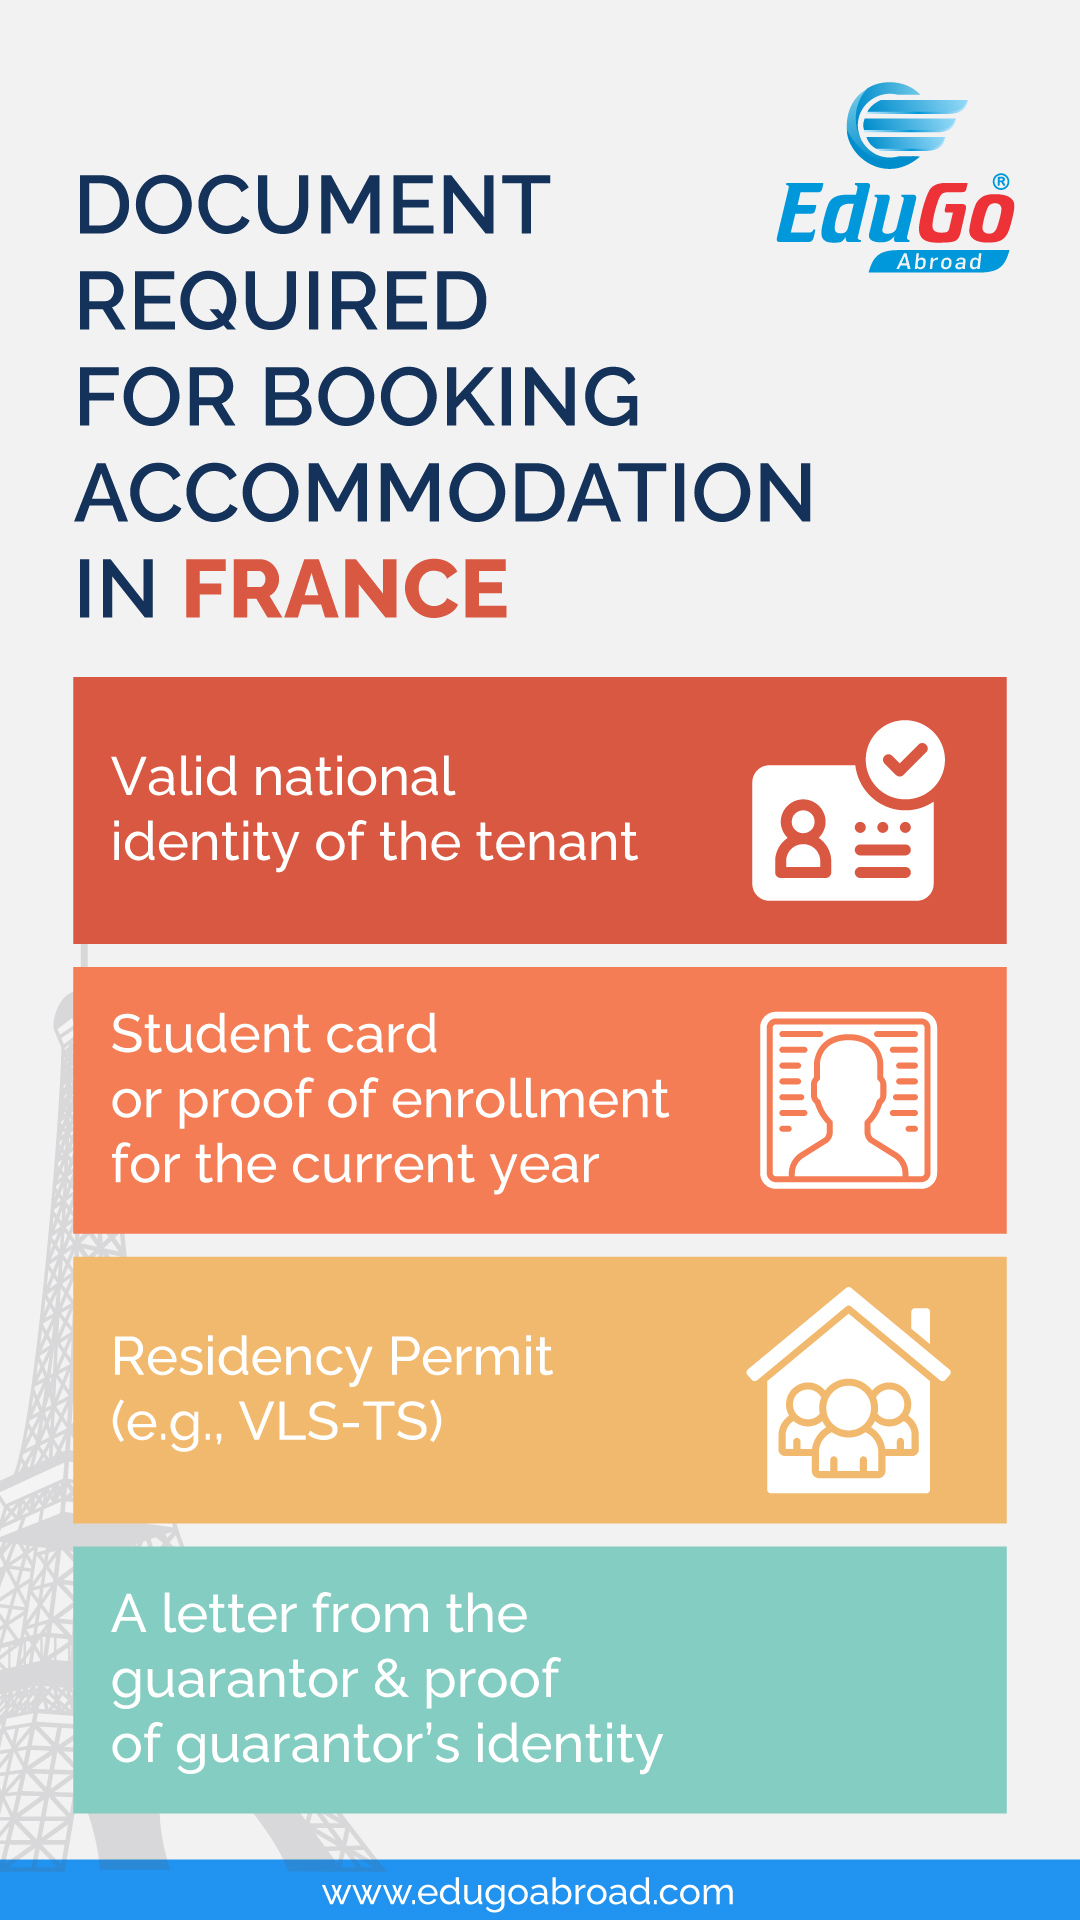 Document required for accomodation in france